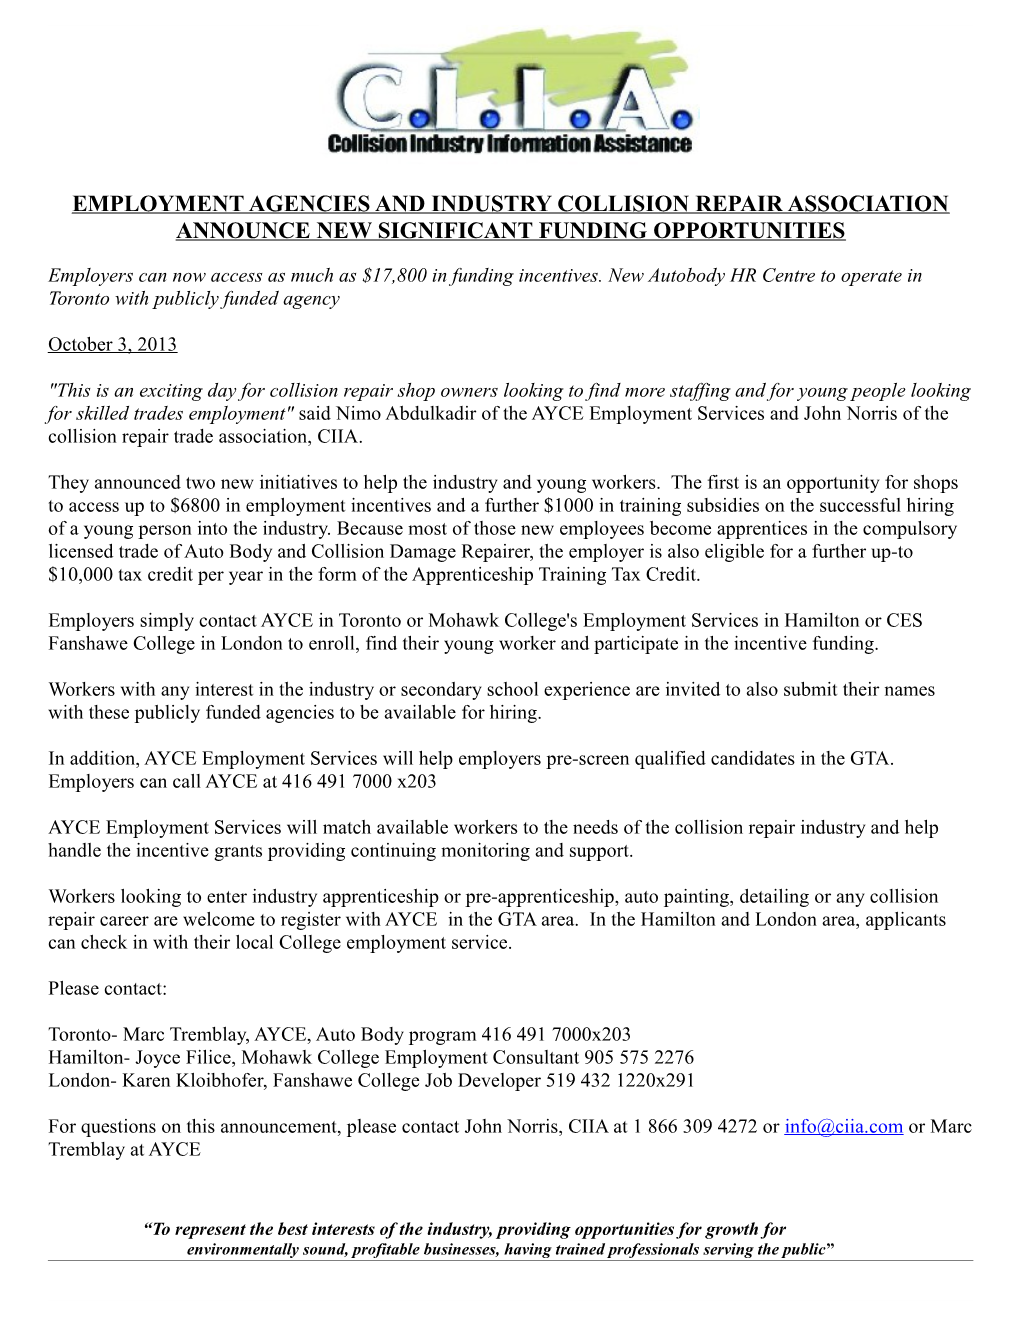 Employment Agencies and Industry Collision Repair Association Announce New Significant